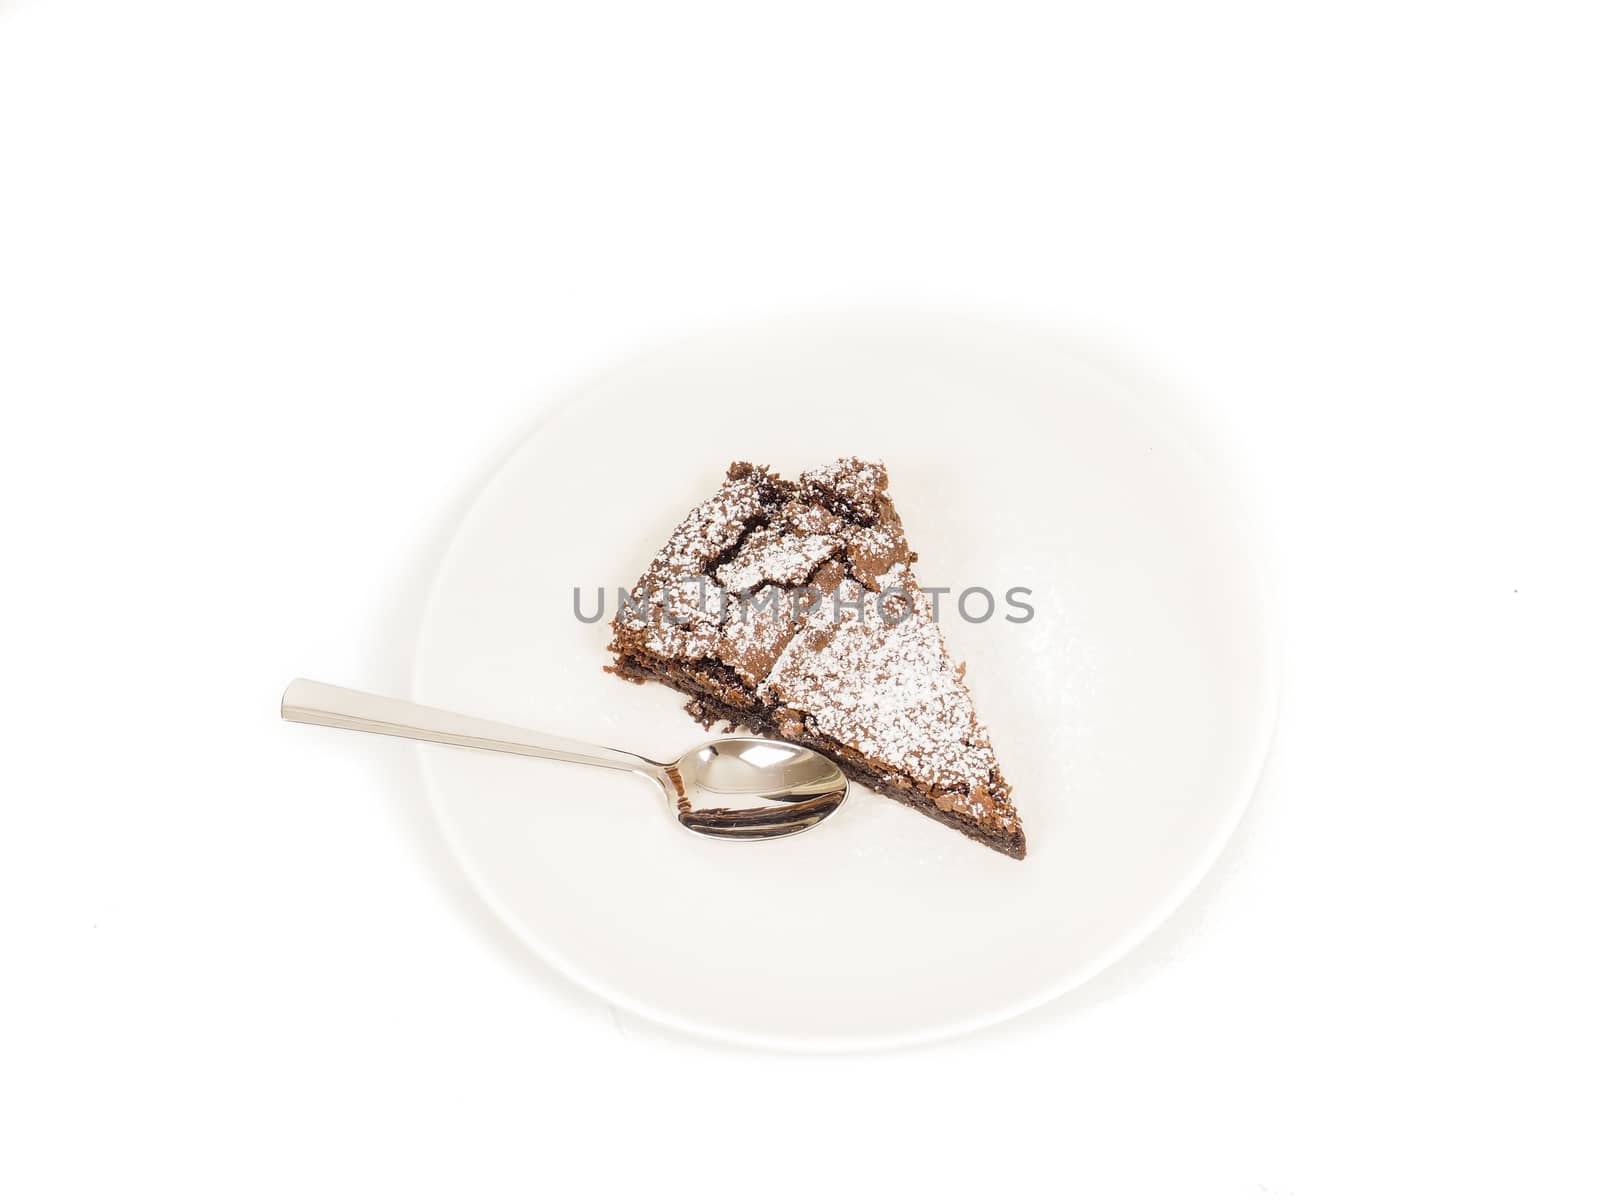 Piece of fresh made chocolate on plate with powdered sugar and teaspoon